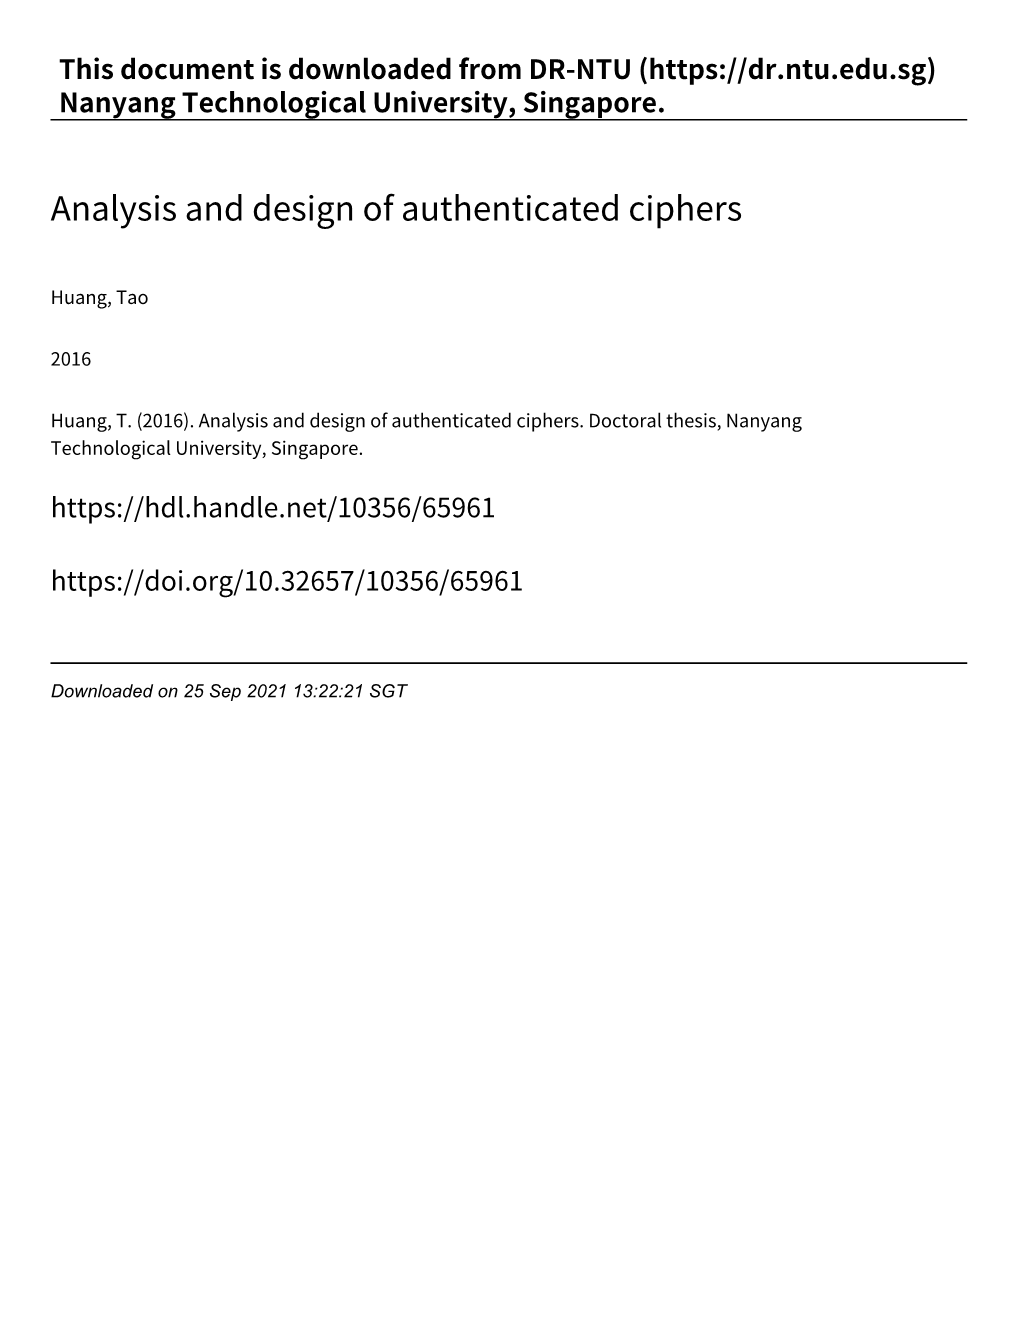 Analysis and Design of Authenticated Ciphers